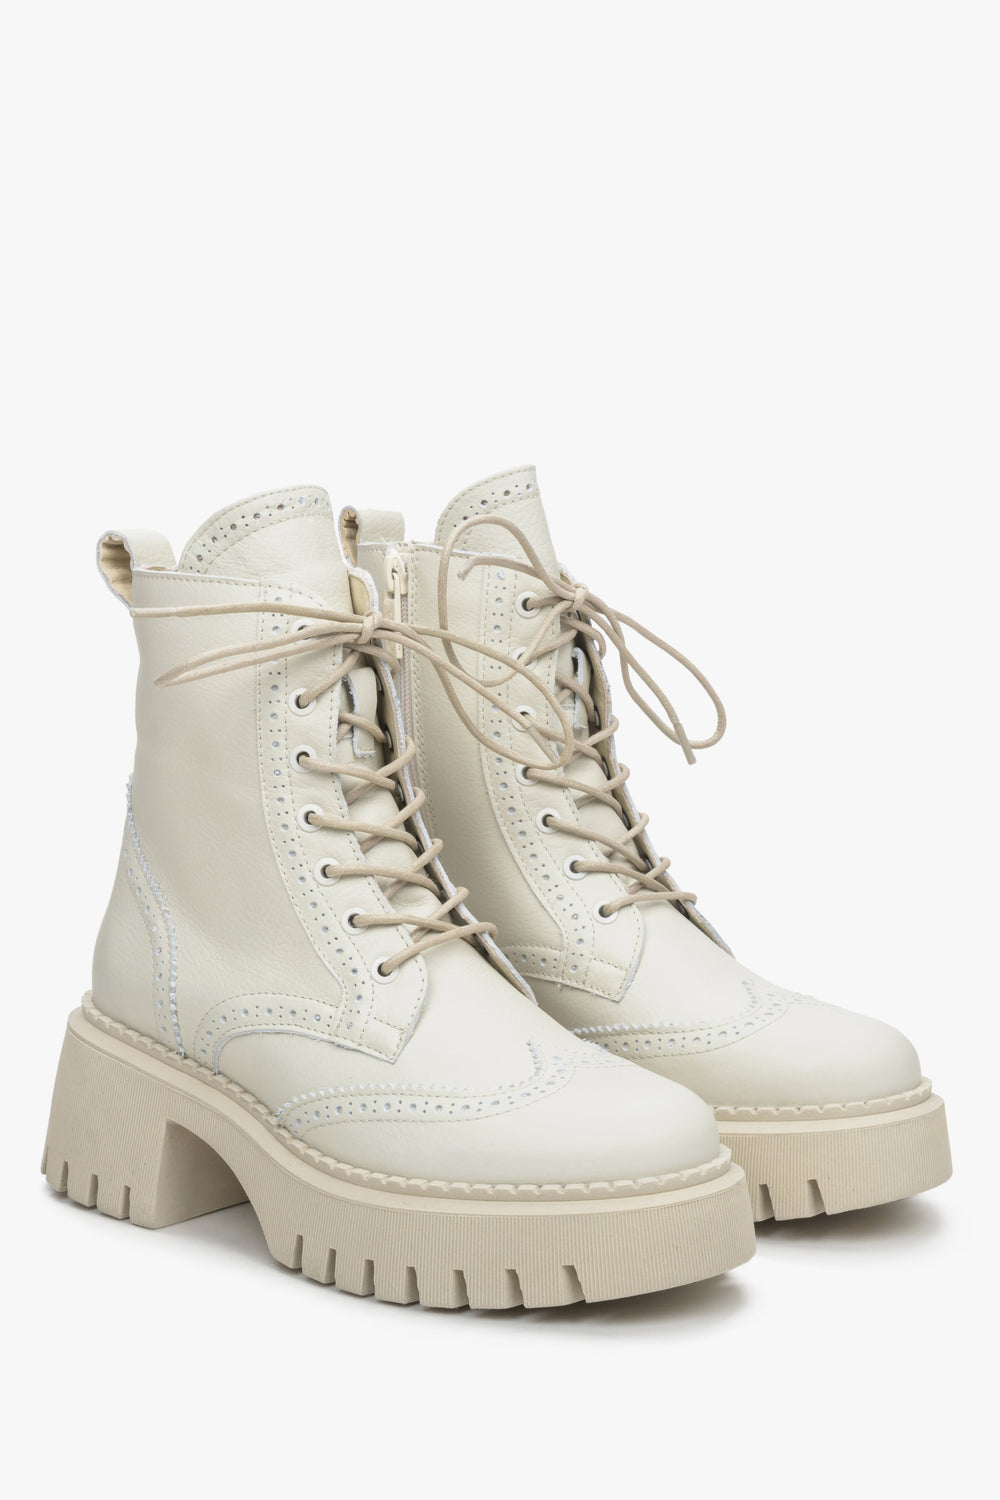 Light beige leather ankle boots, Estro.